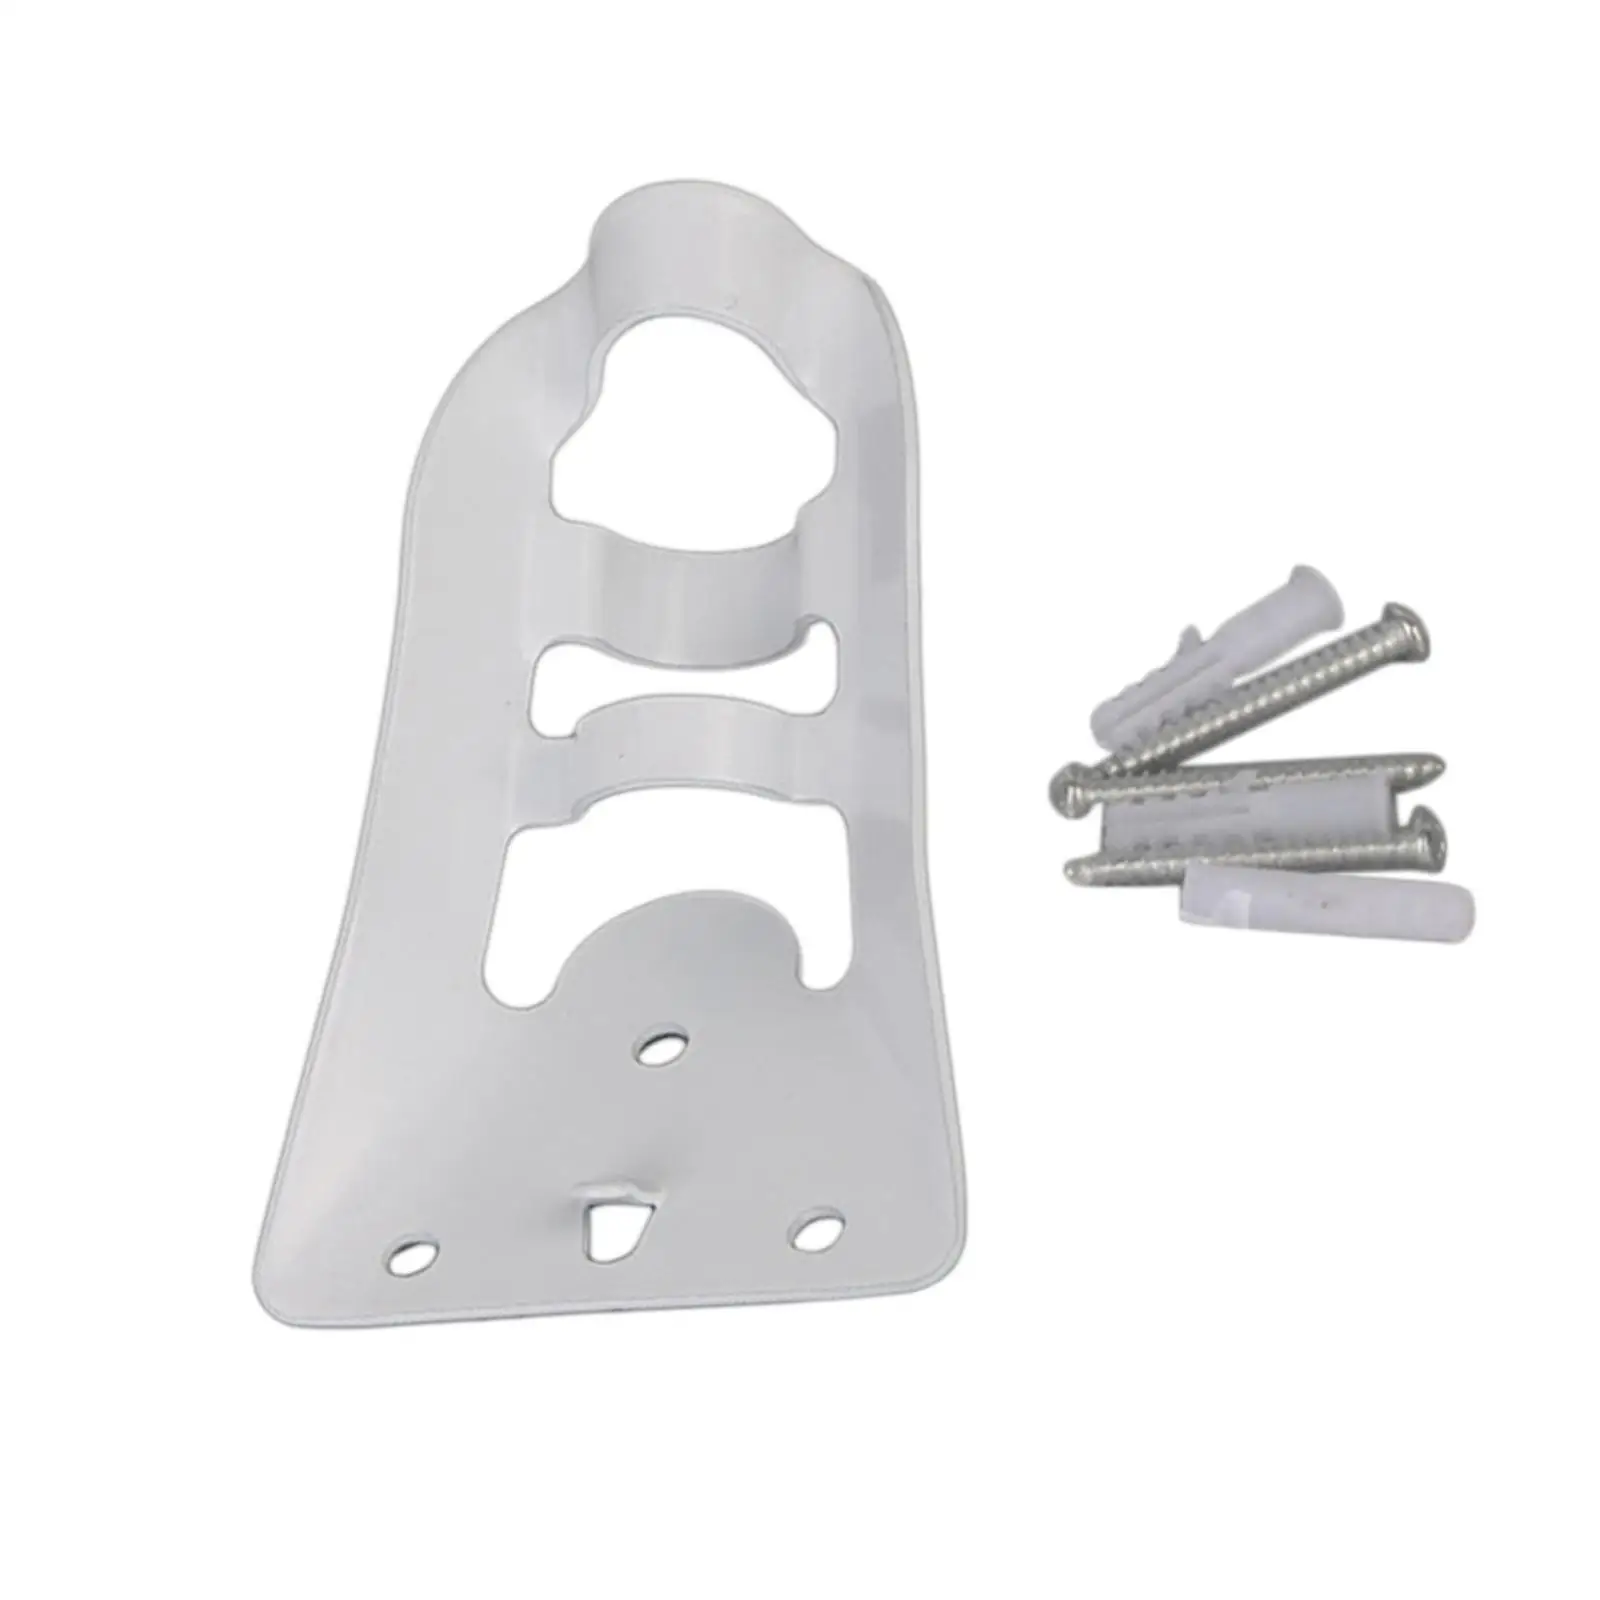 Flagpole Holder Base Fittings Iron with Screws Mounting Durable White for Garden Patio Porch